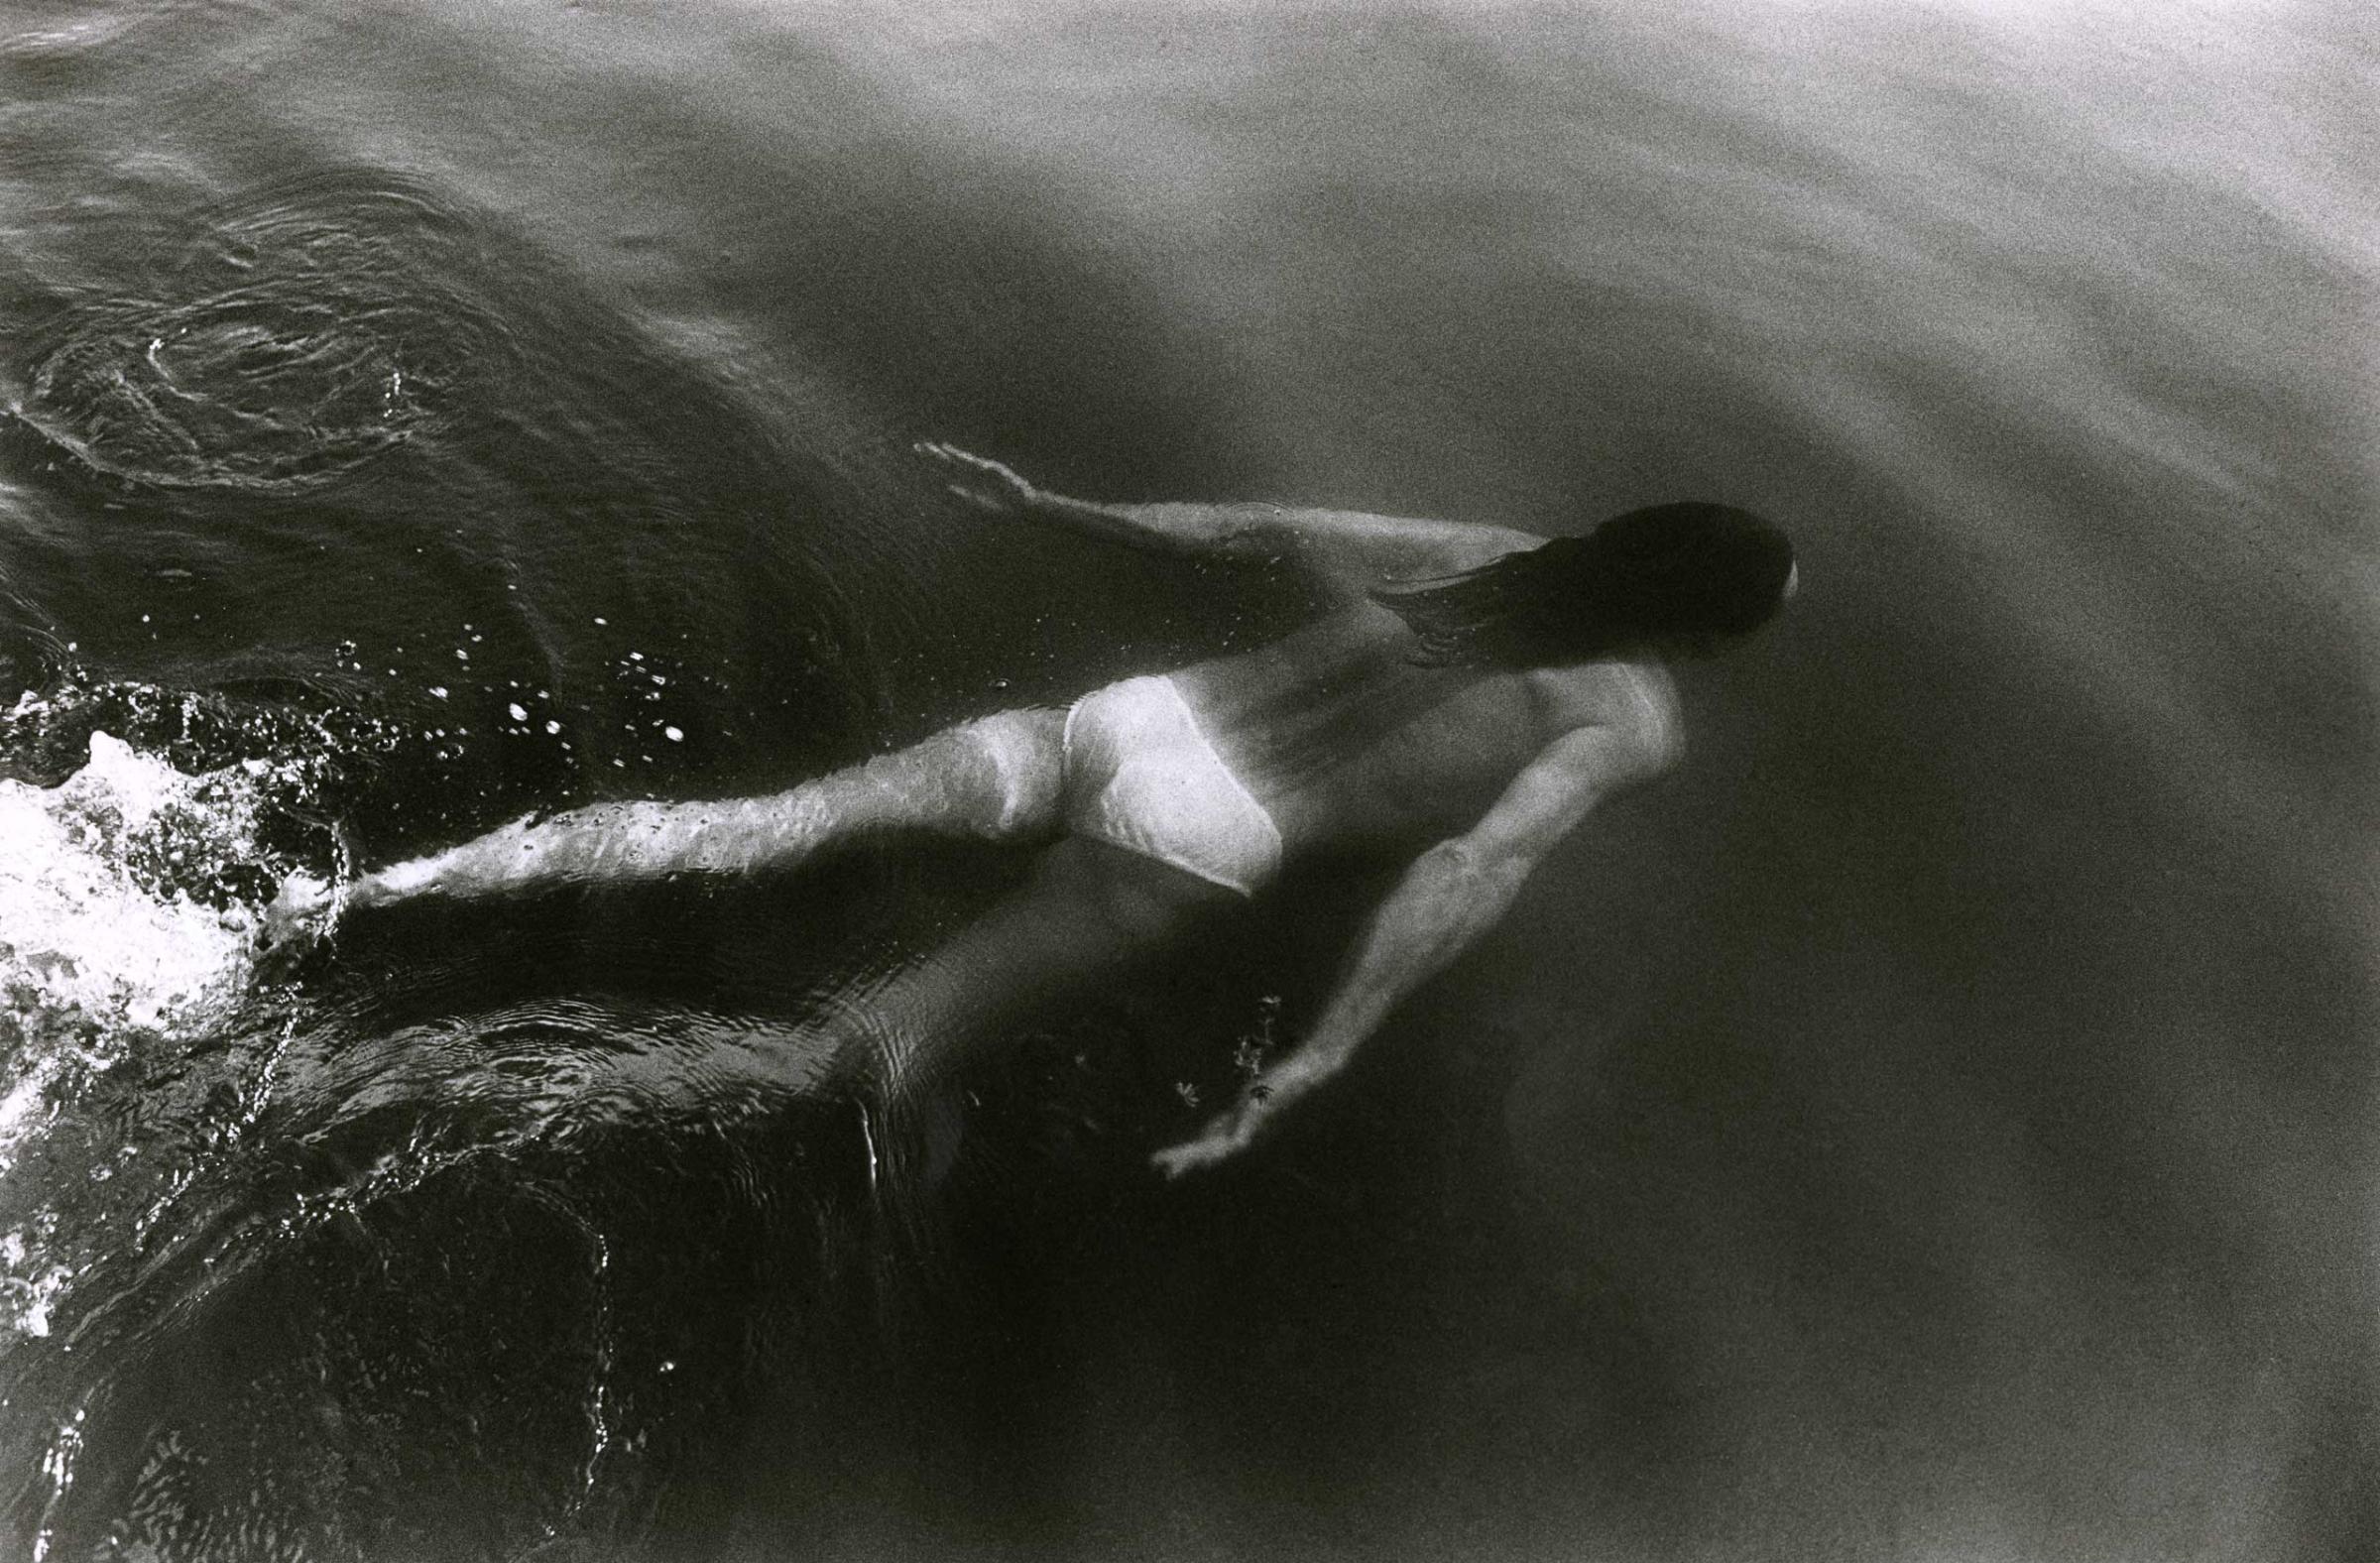 Peta swims in a lake on the Pine Ridge (Lakota) Indian Reservation in South Dakota, during a trip home with photographer Therese Frare in July 1991.